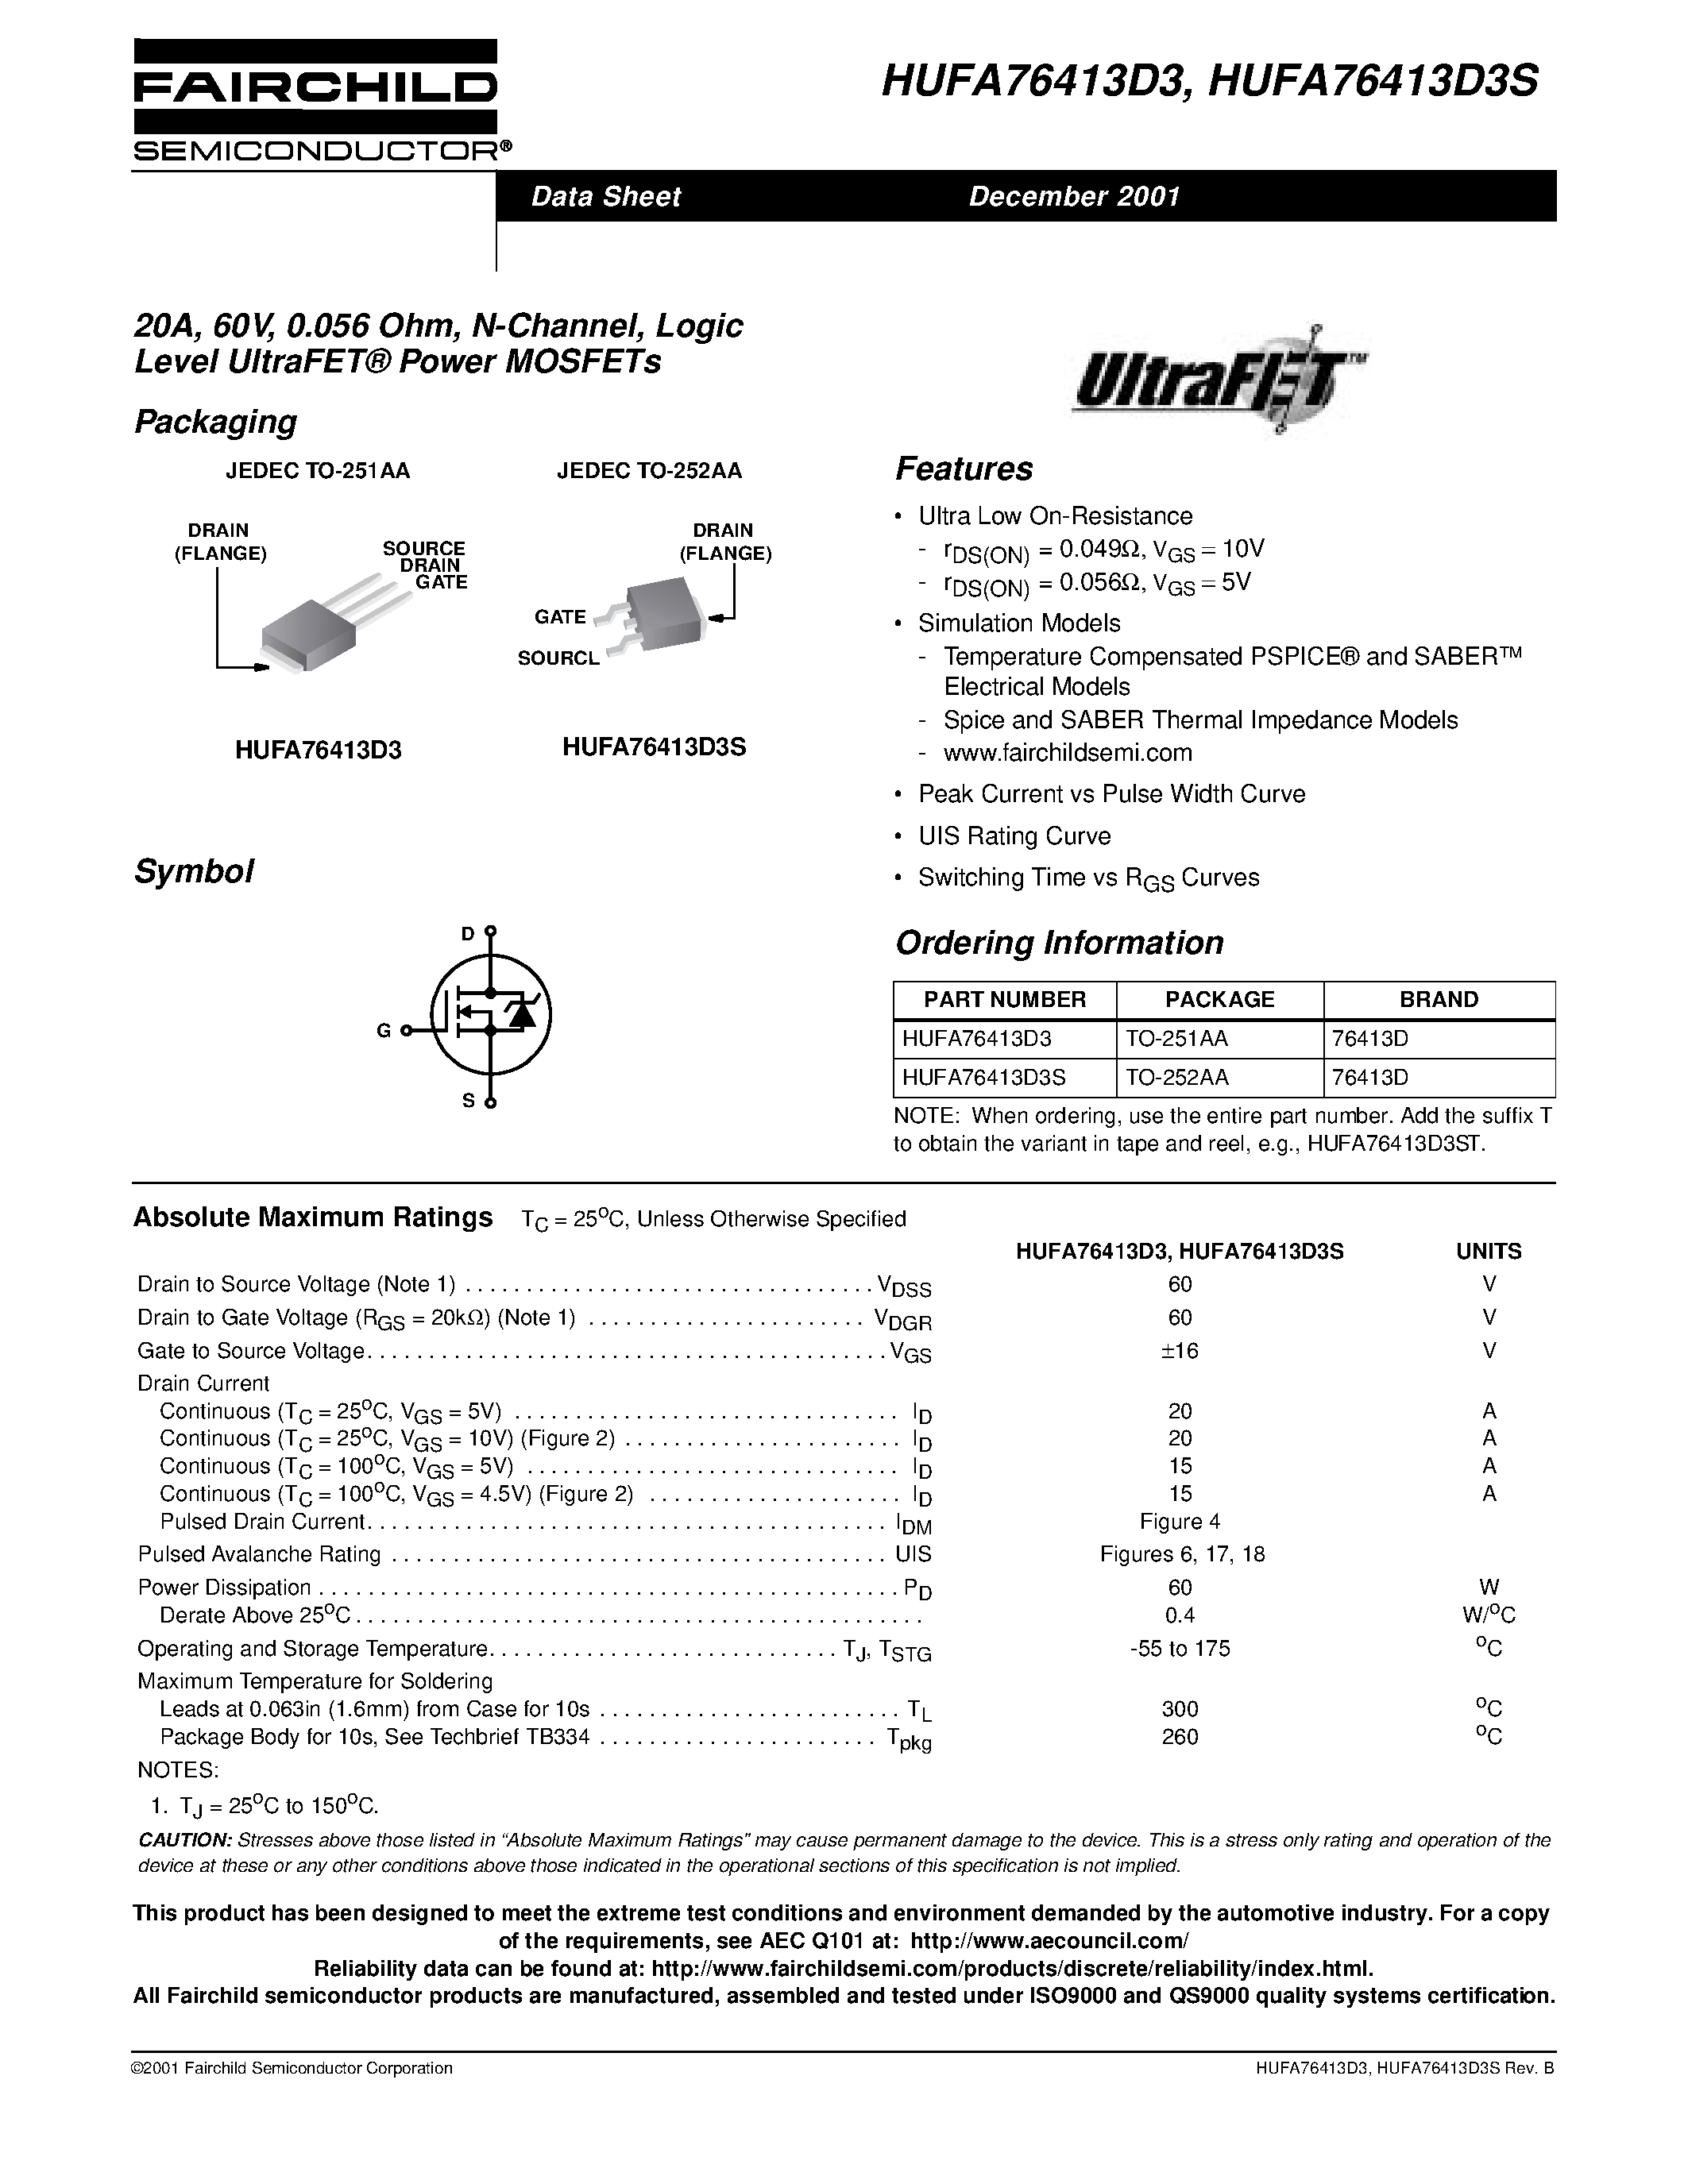 Datasheet HUFA76413D3S - 20A/ 60V/ 0.056 Ohm/ N-Channel/ Logic Level UltraFET Power MOSFETs page 1